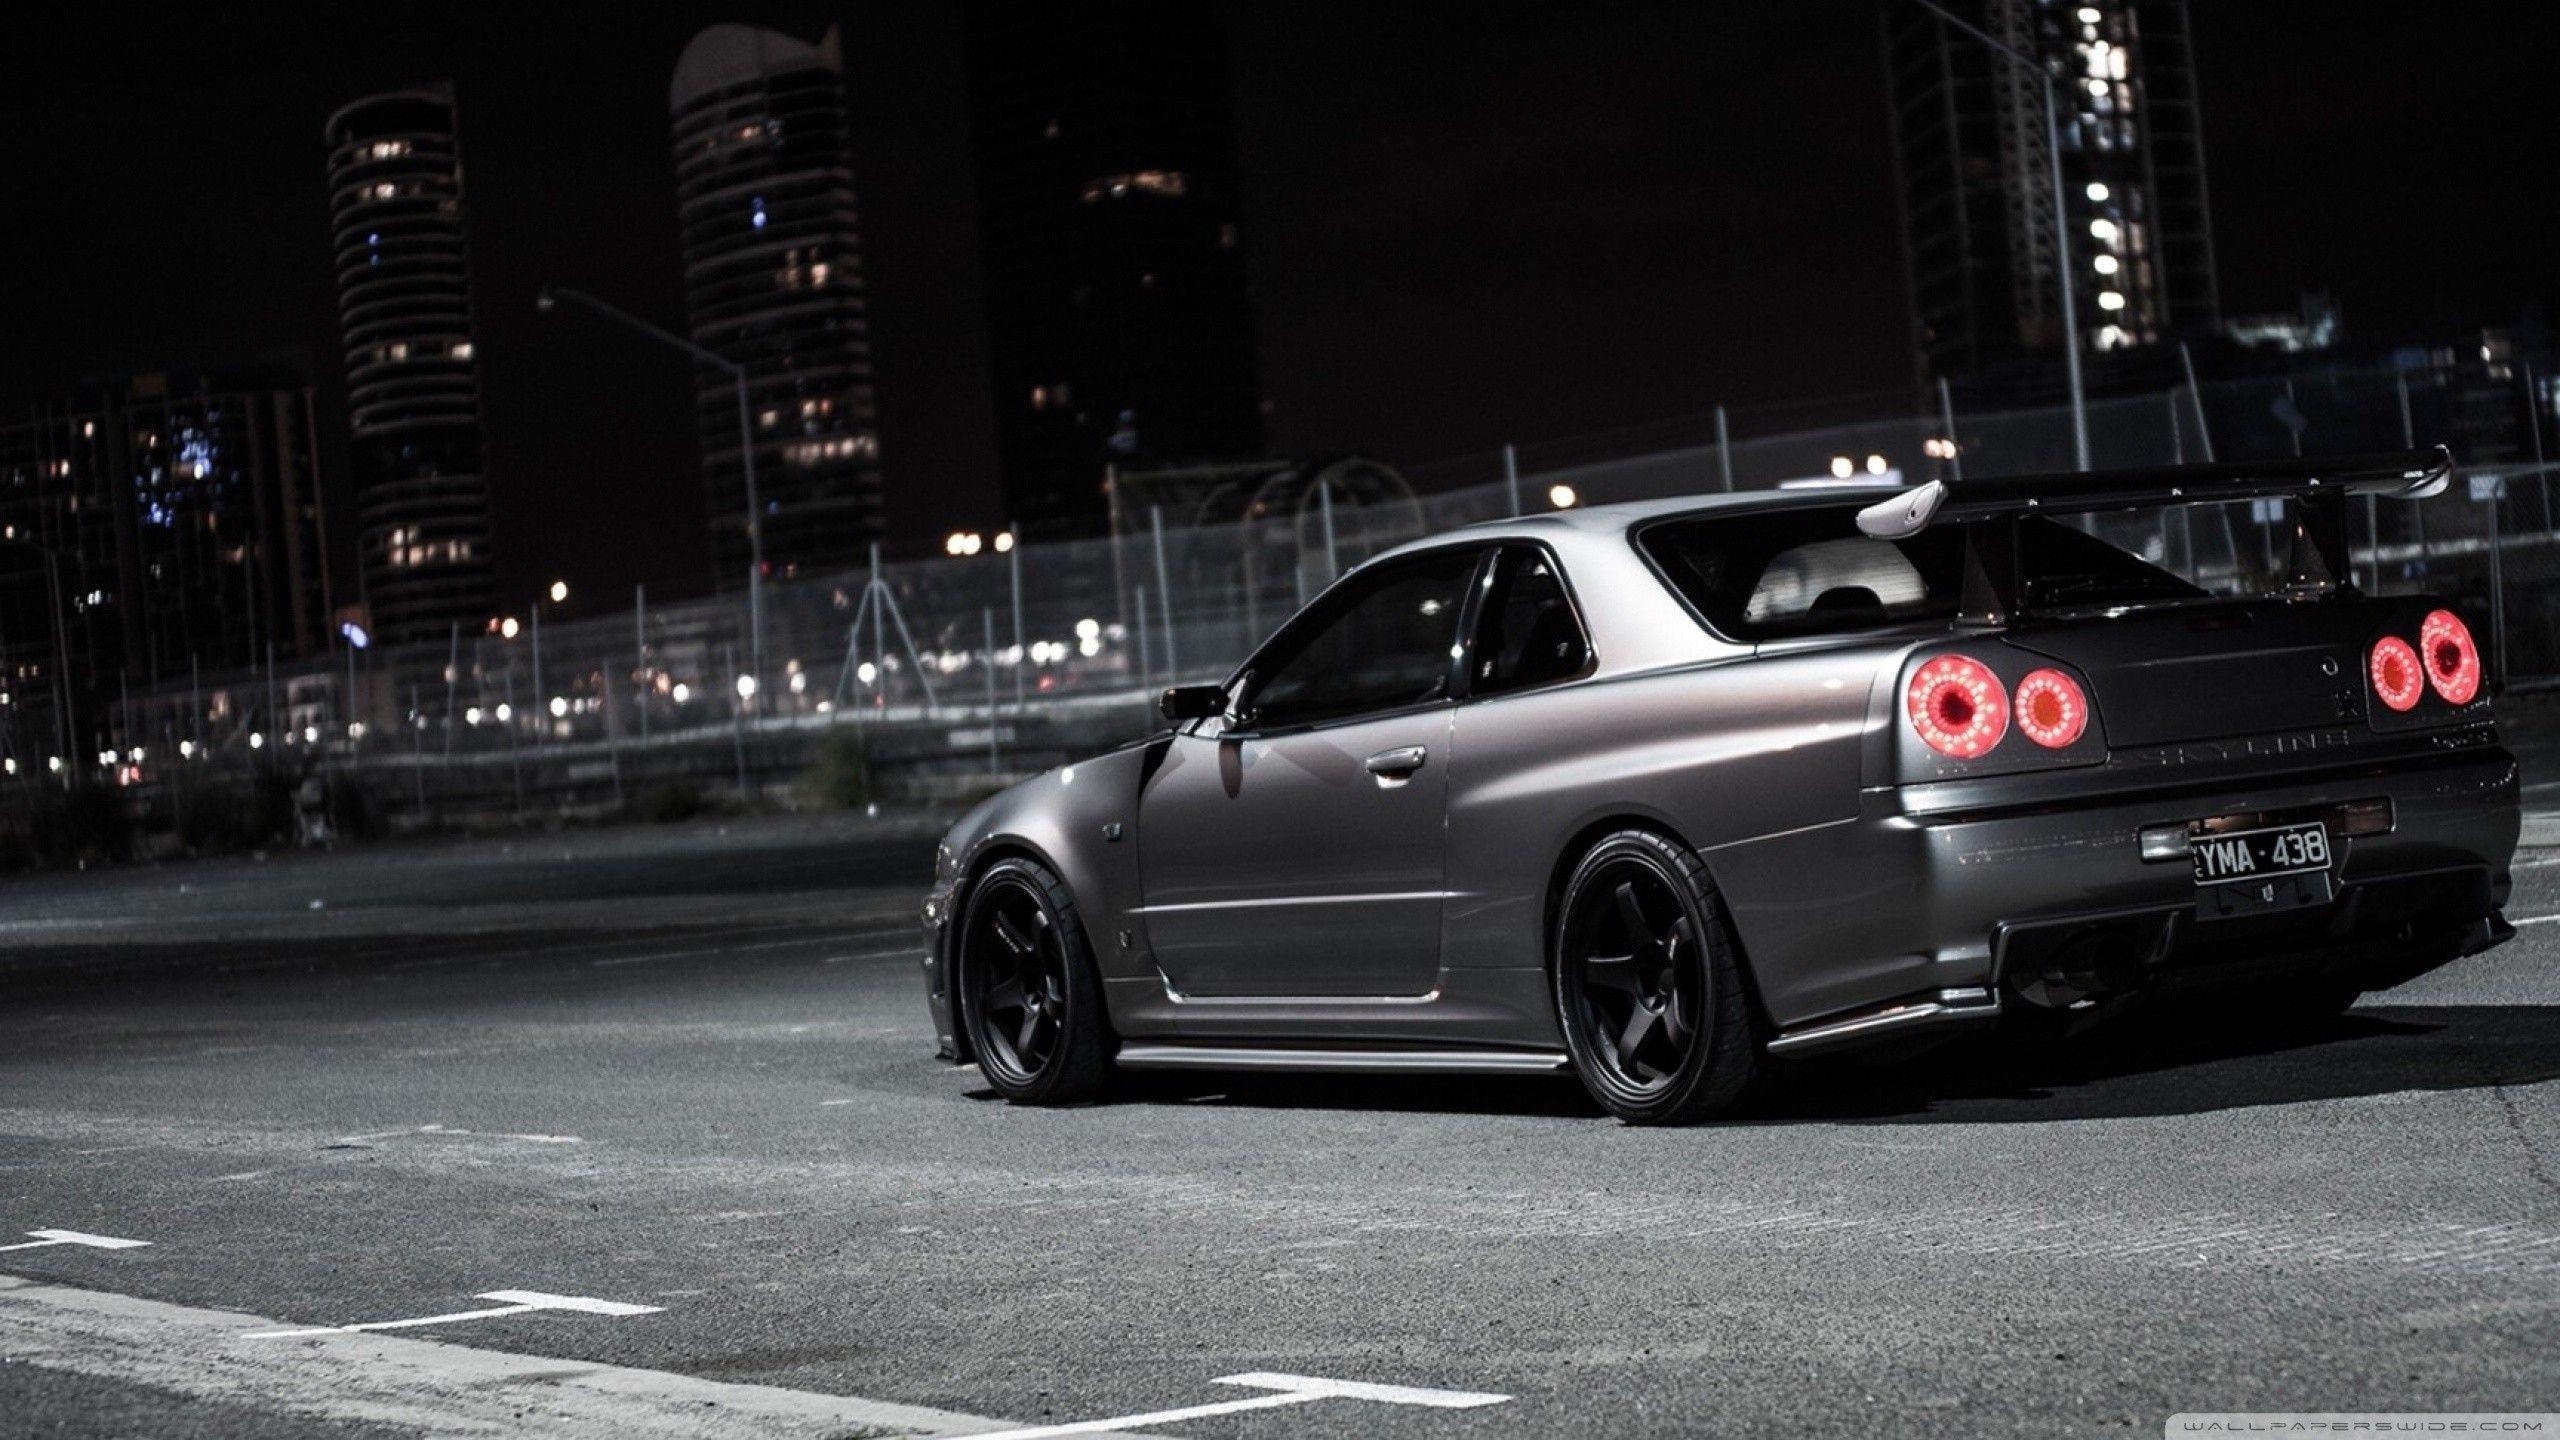 Skyline Car Wallpapers - Top Free Skyline Car Backgrounds - WallpaperAccess